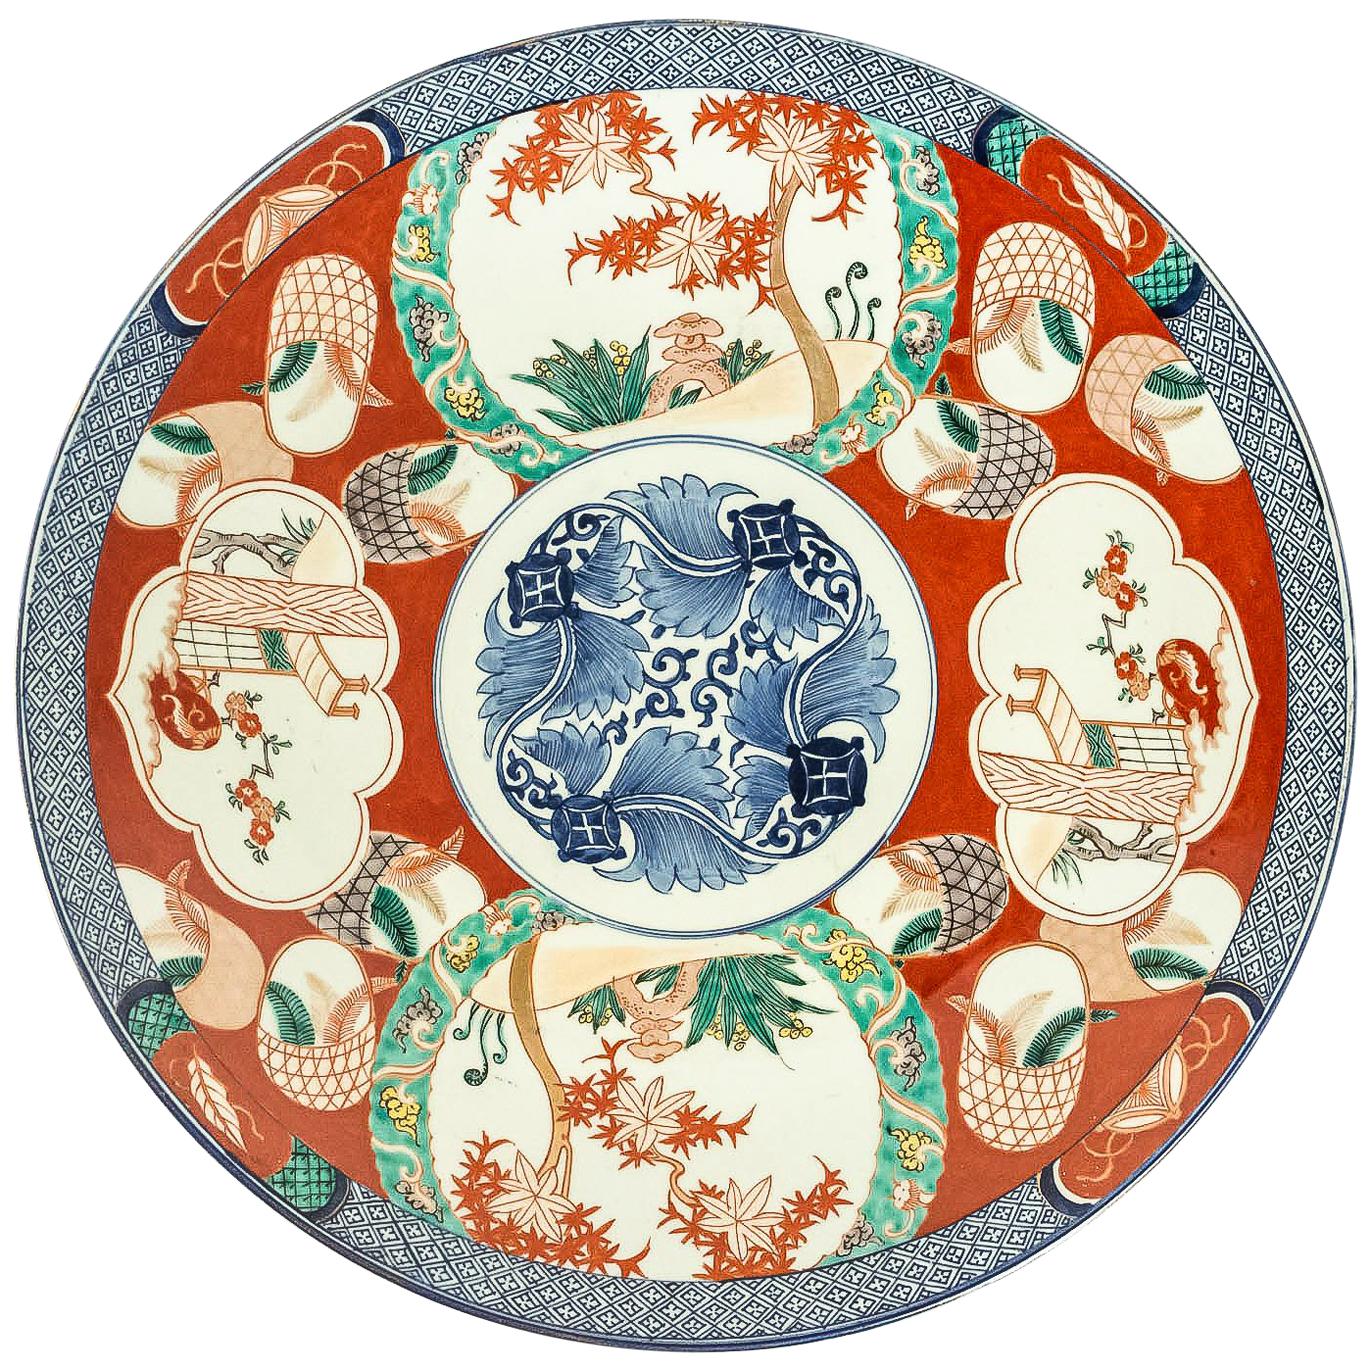 Mid-19th Century Japanese Polychrome Porcelain, Magnificent Round Dish